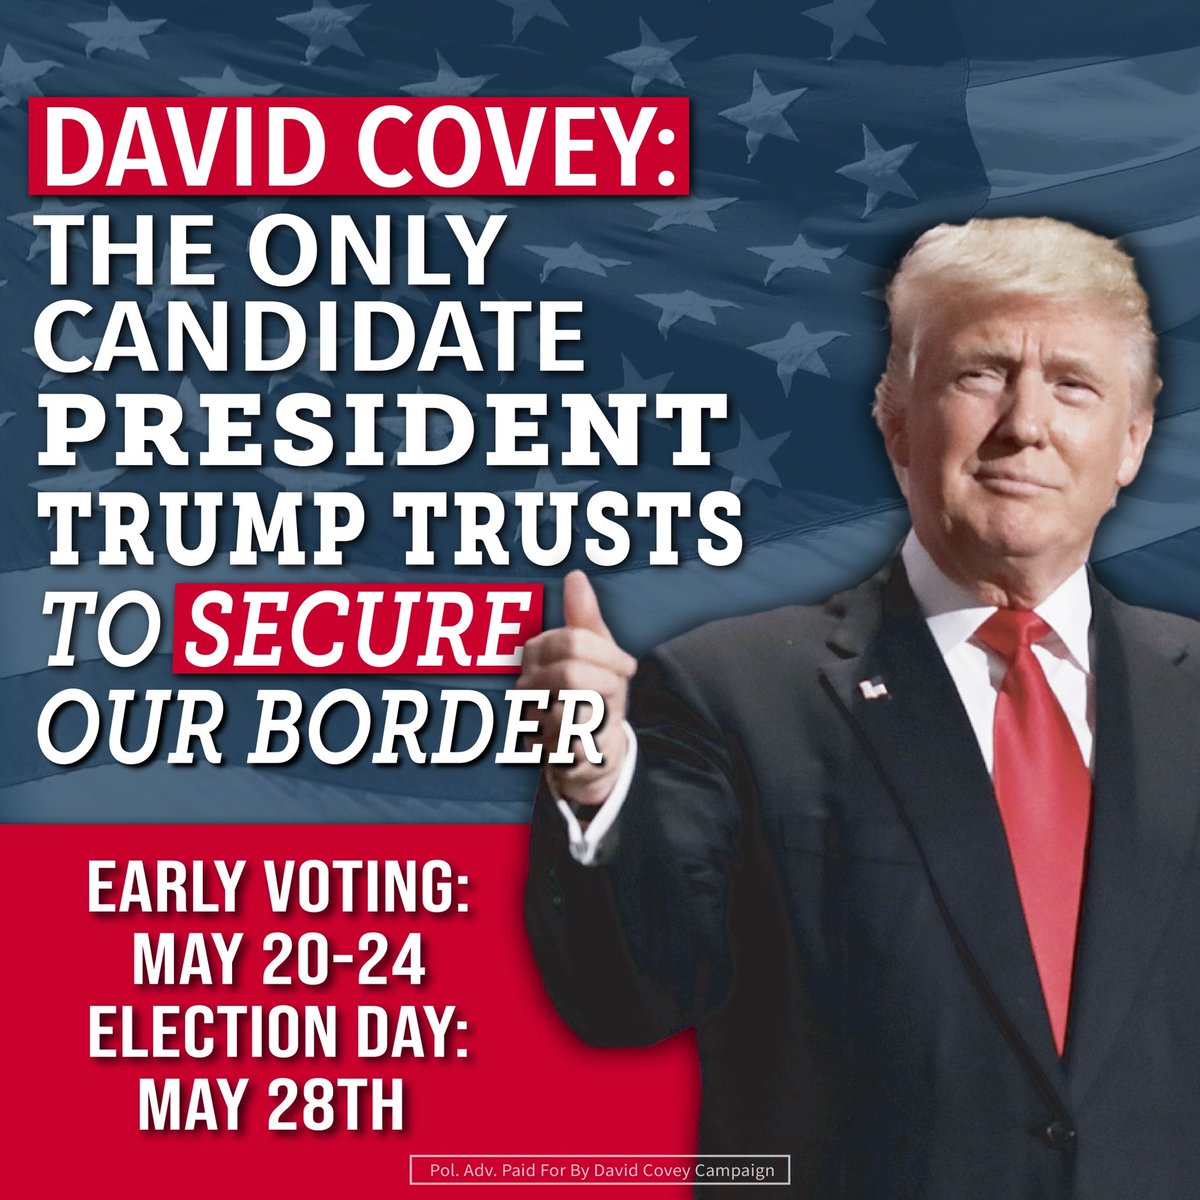 Trump trusts David Covey, you should too! Early voting starts in ONE WEEK. Make your plan to vote!